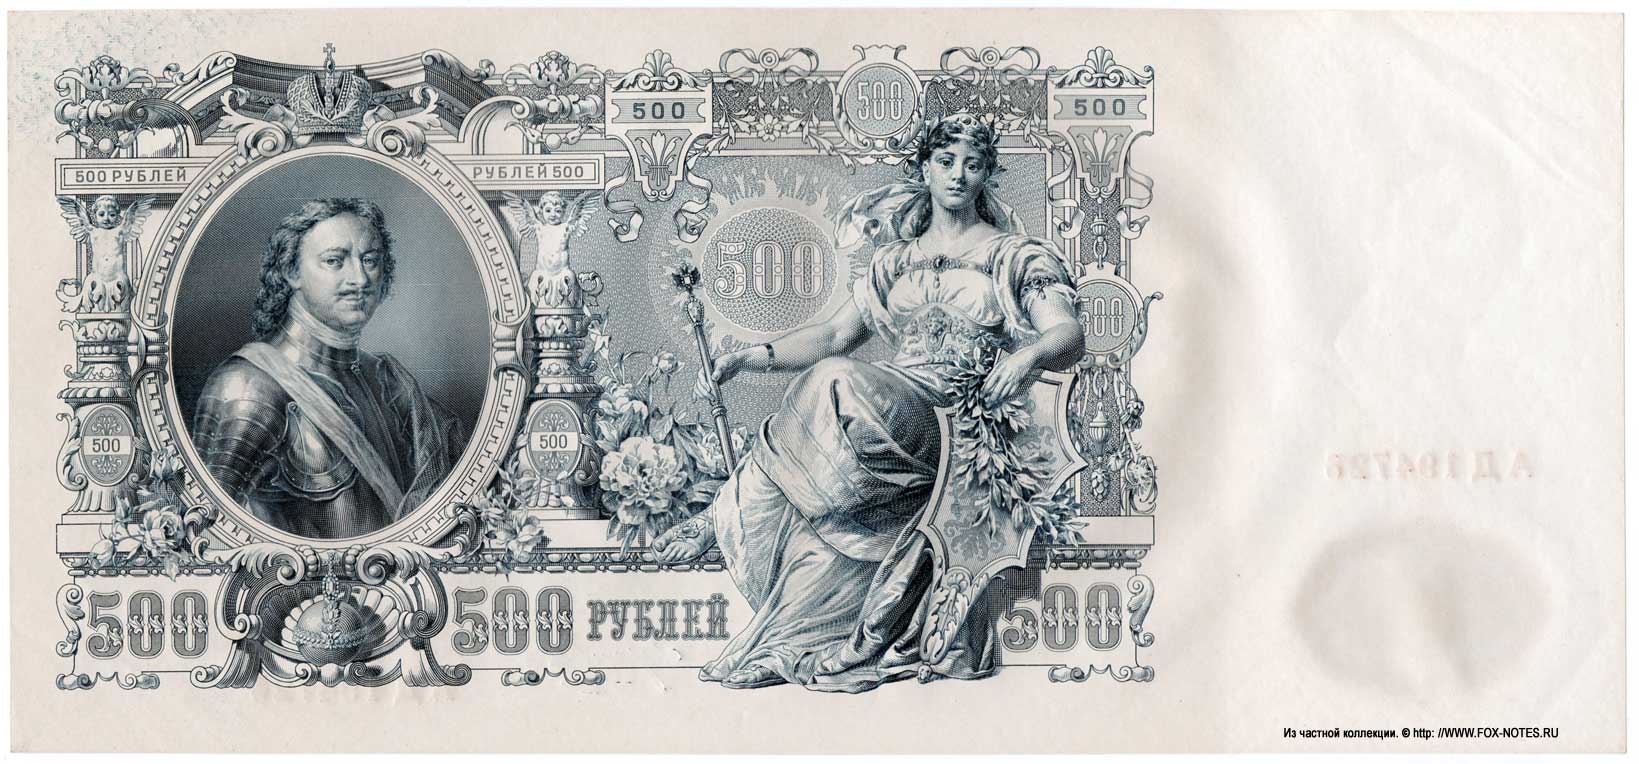 Russian Empire State Credit bank note 500 ruble 1912 